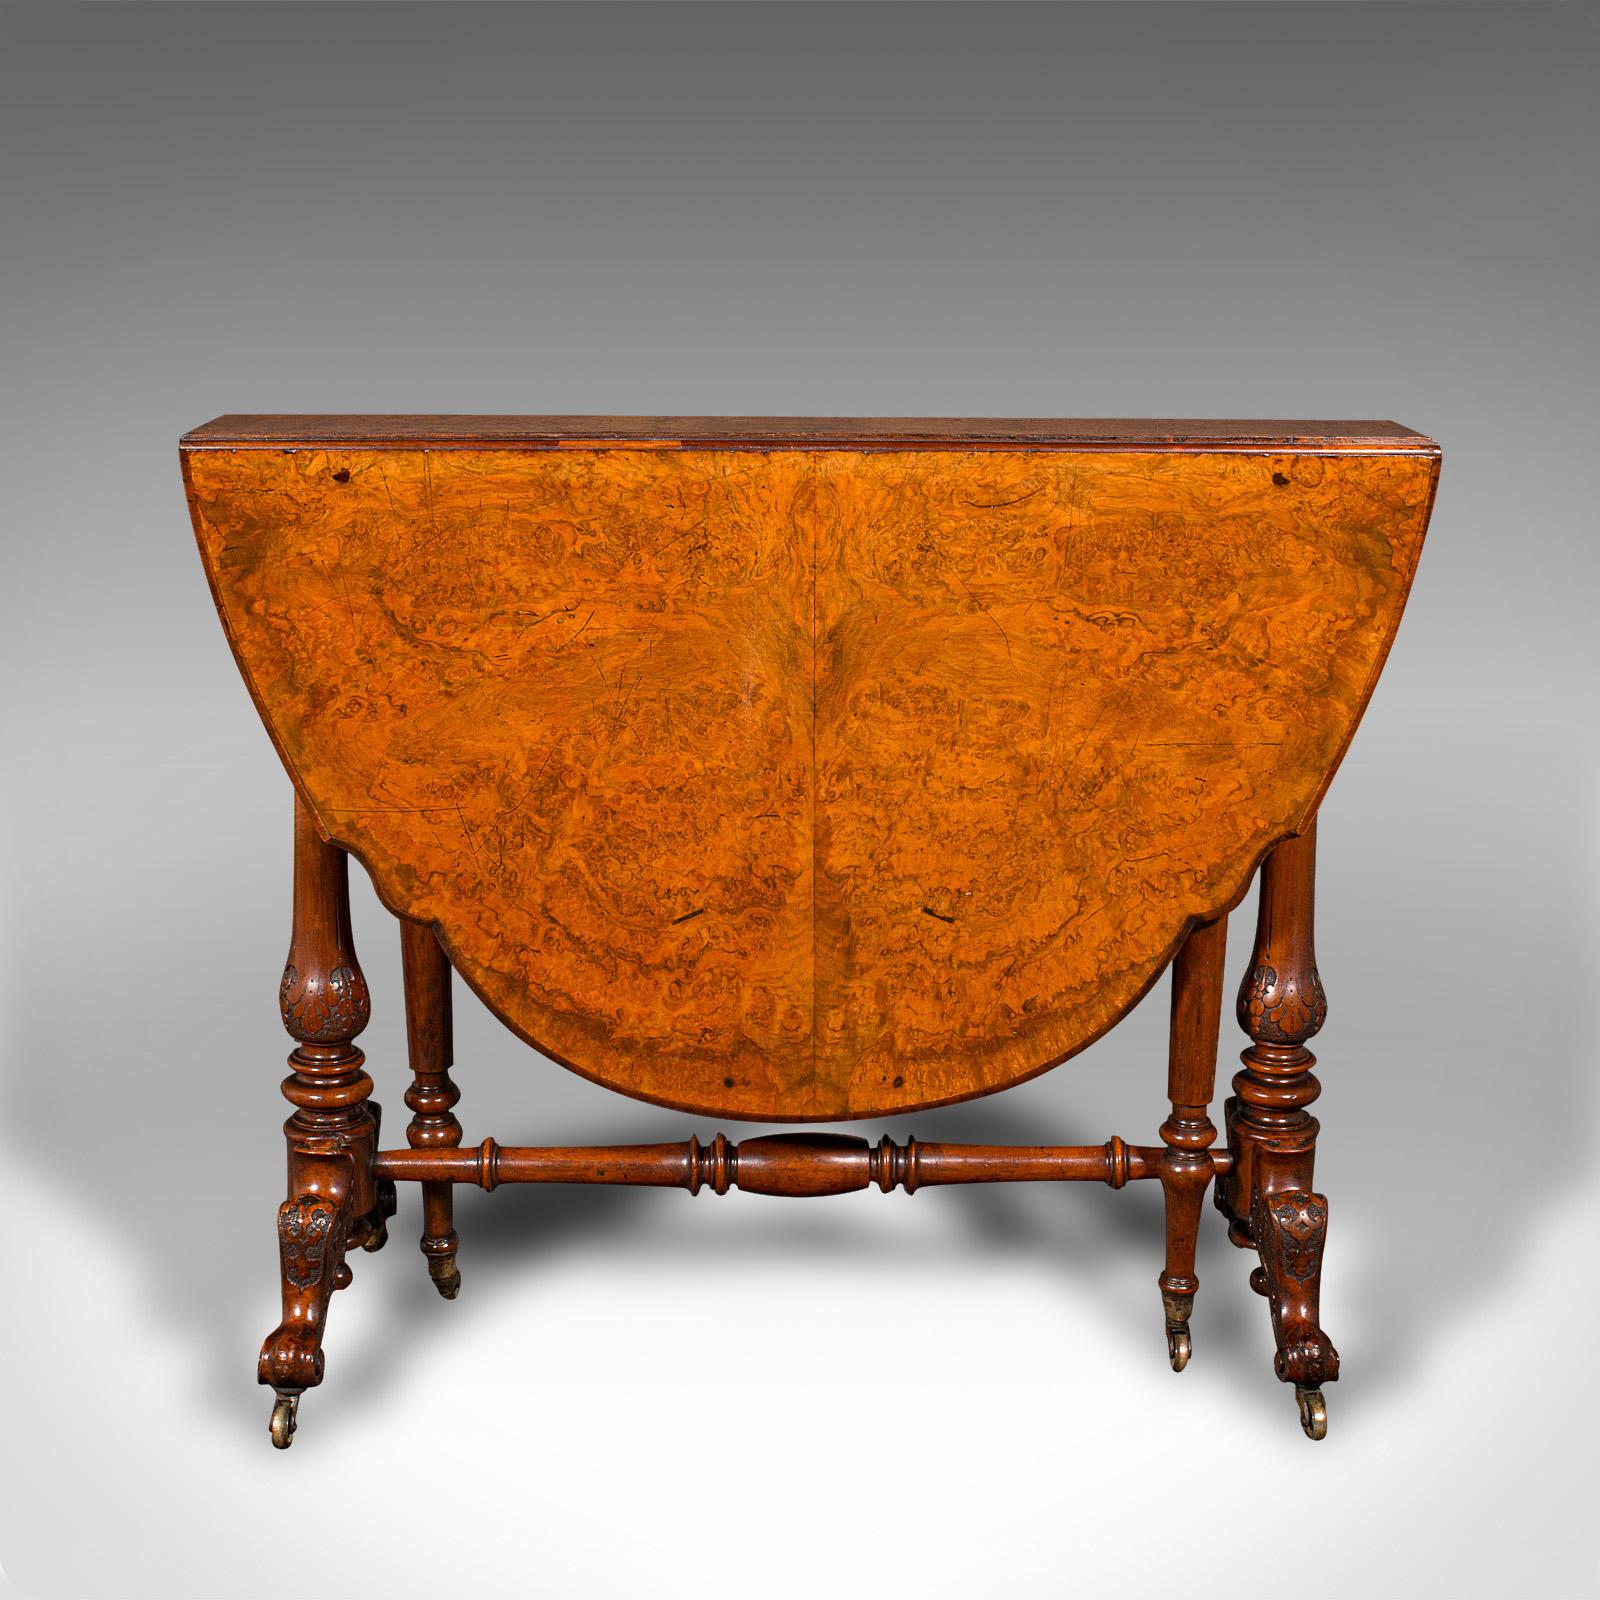 British Antique Sutherland Table, English, Burr Walnut, 4 Seat, Occasional, Victorian For Sale